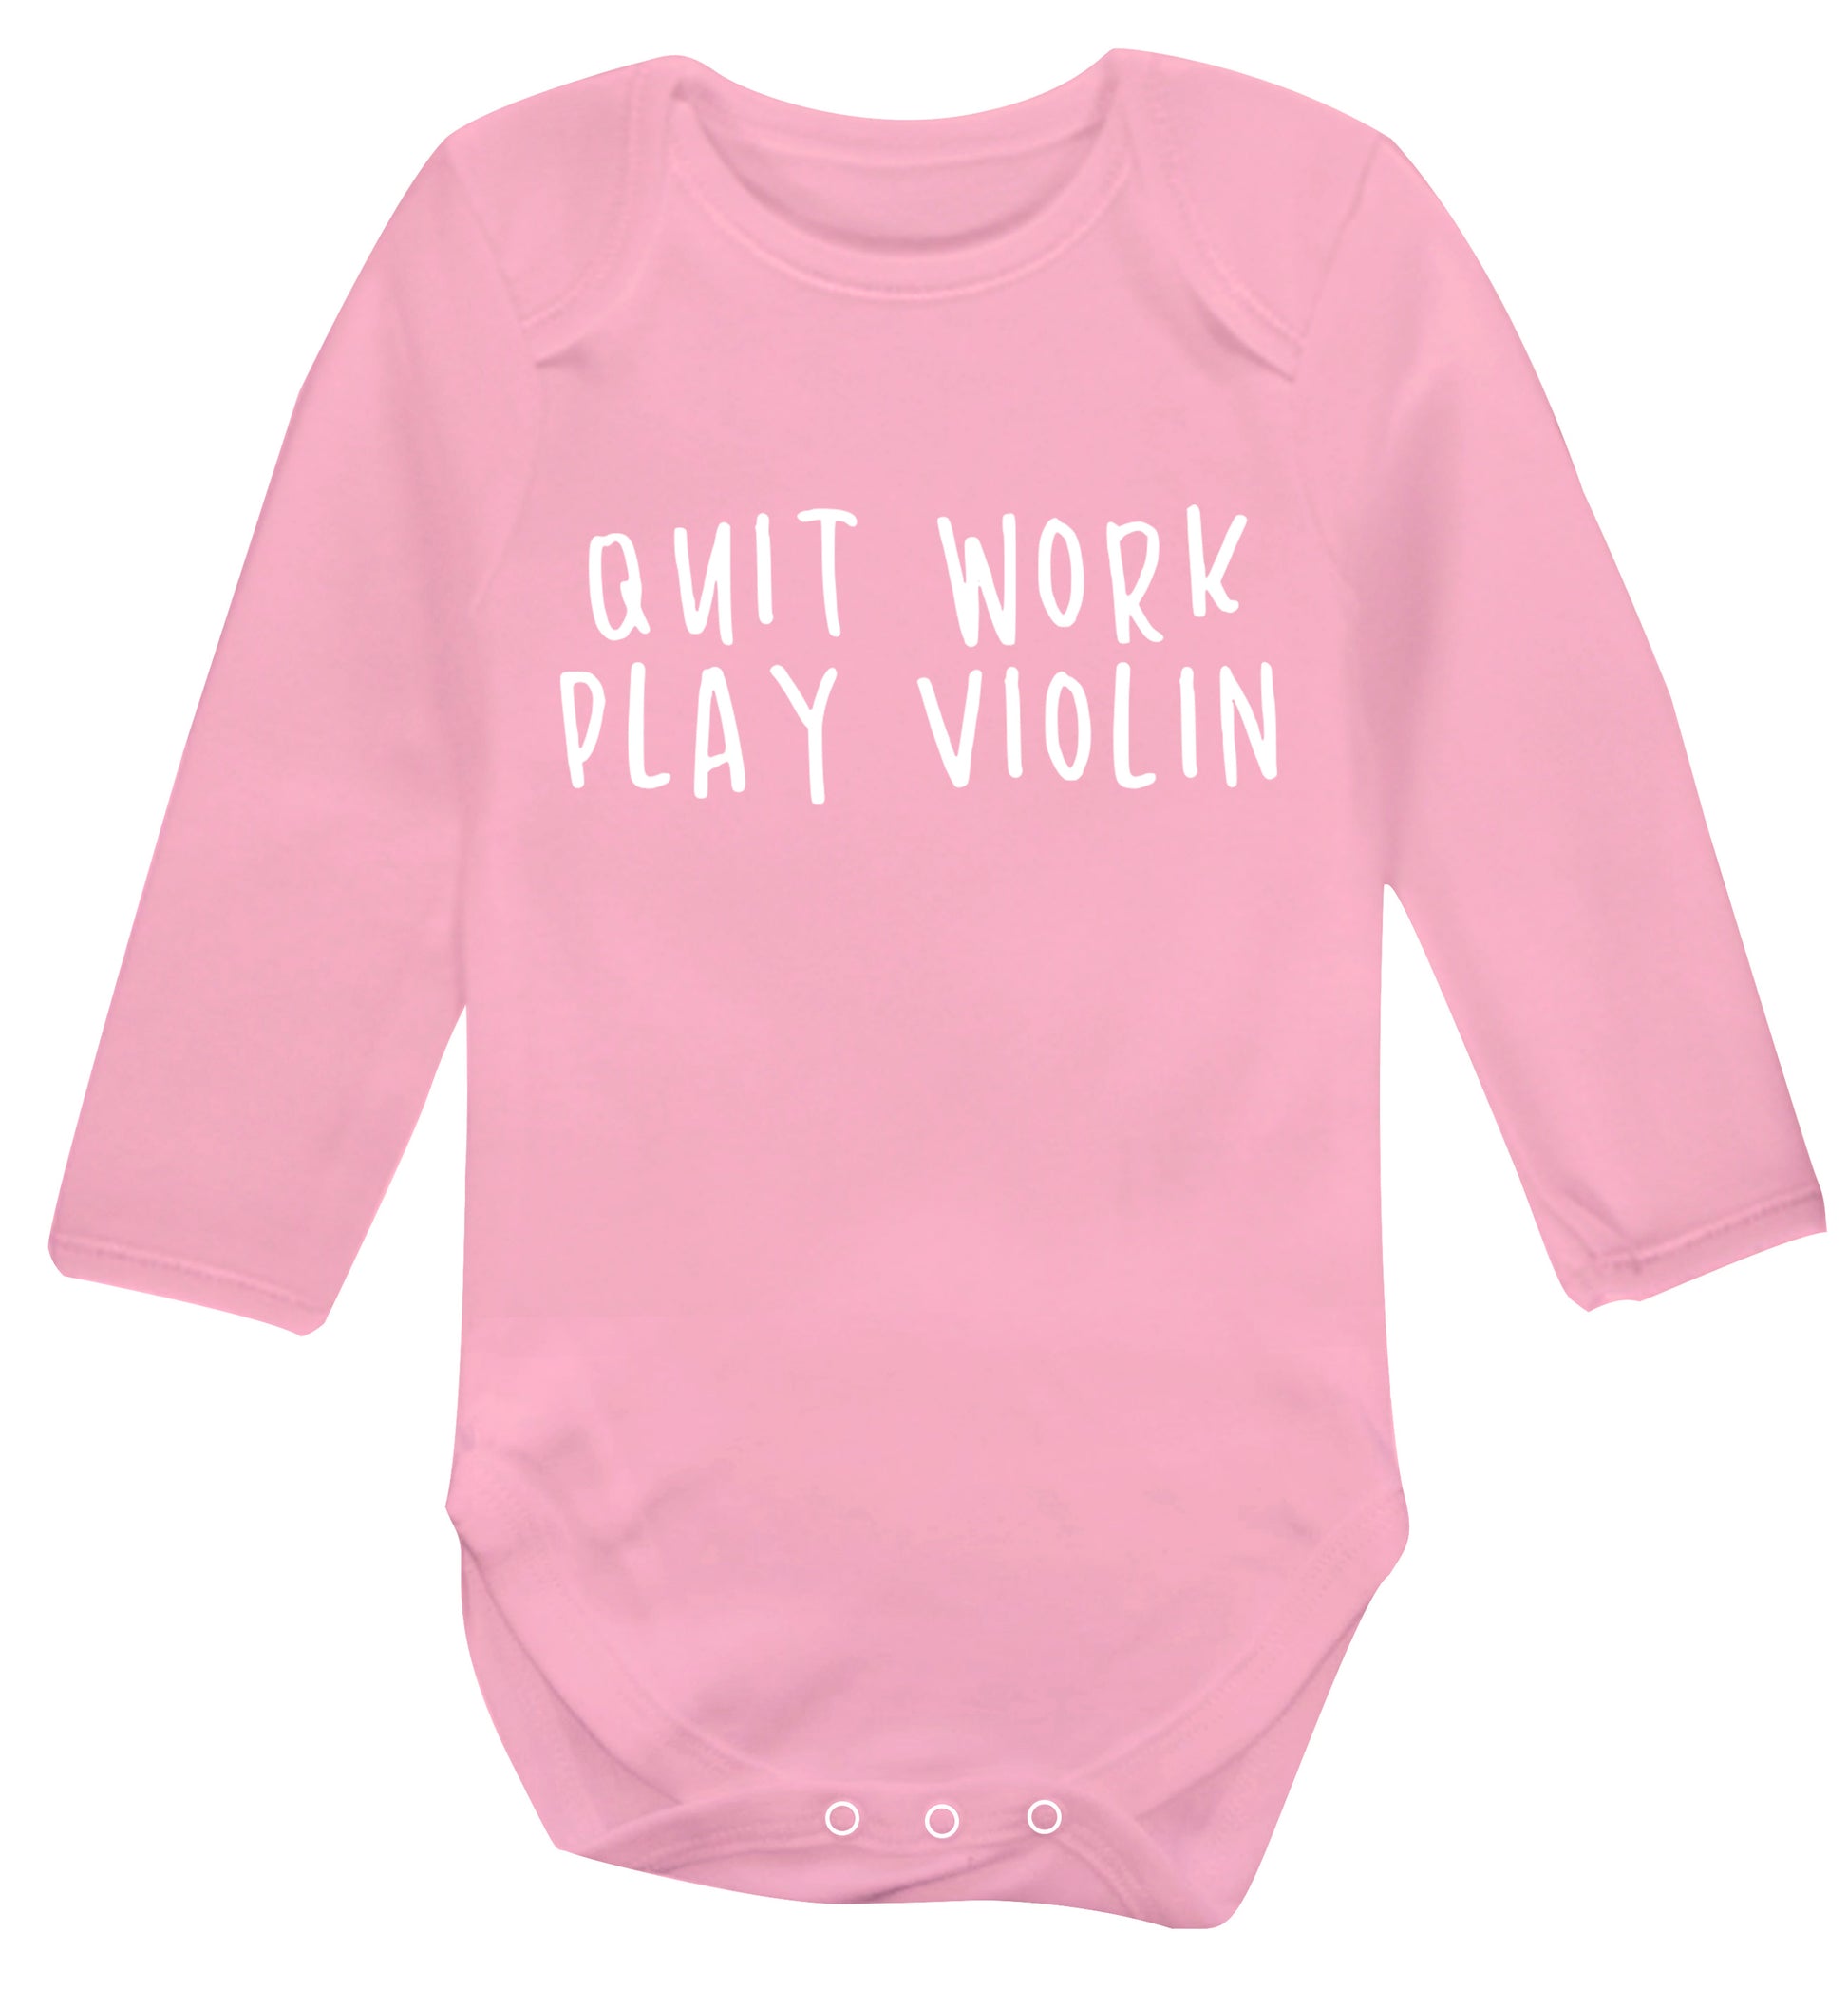 Quit work play violin Baby Vest long sleeved pale pink 6-12 months